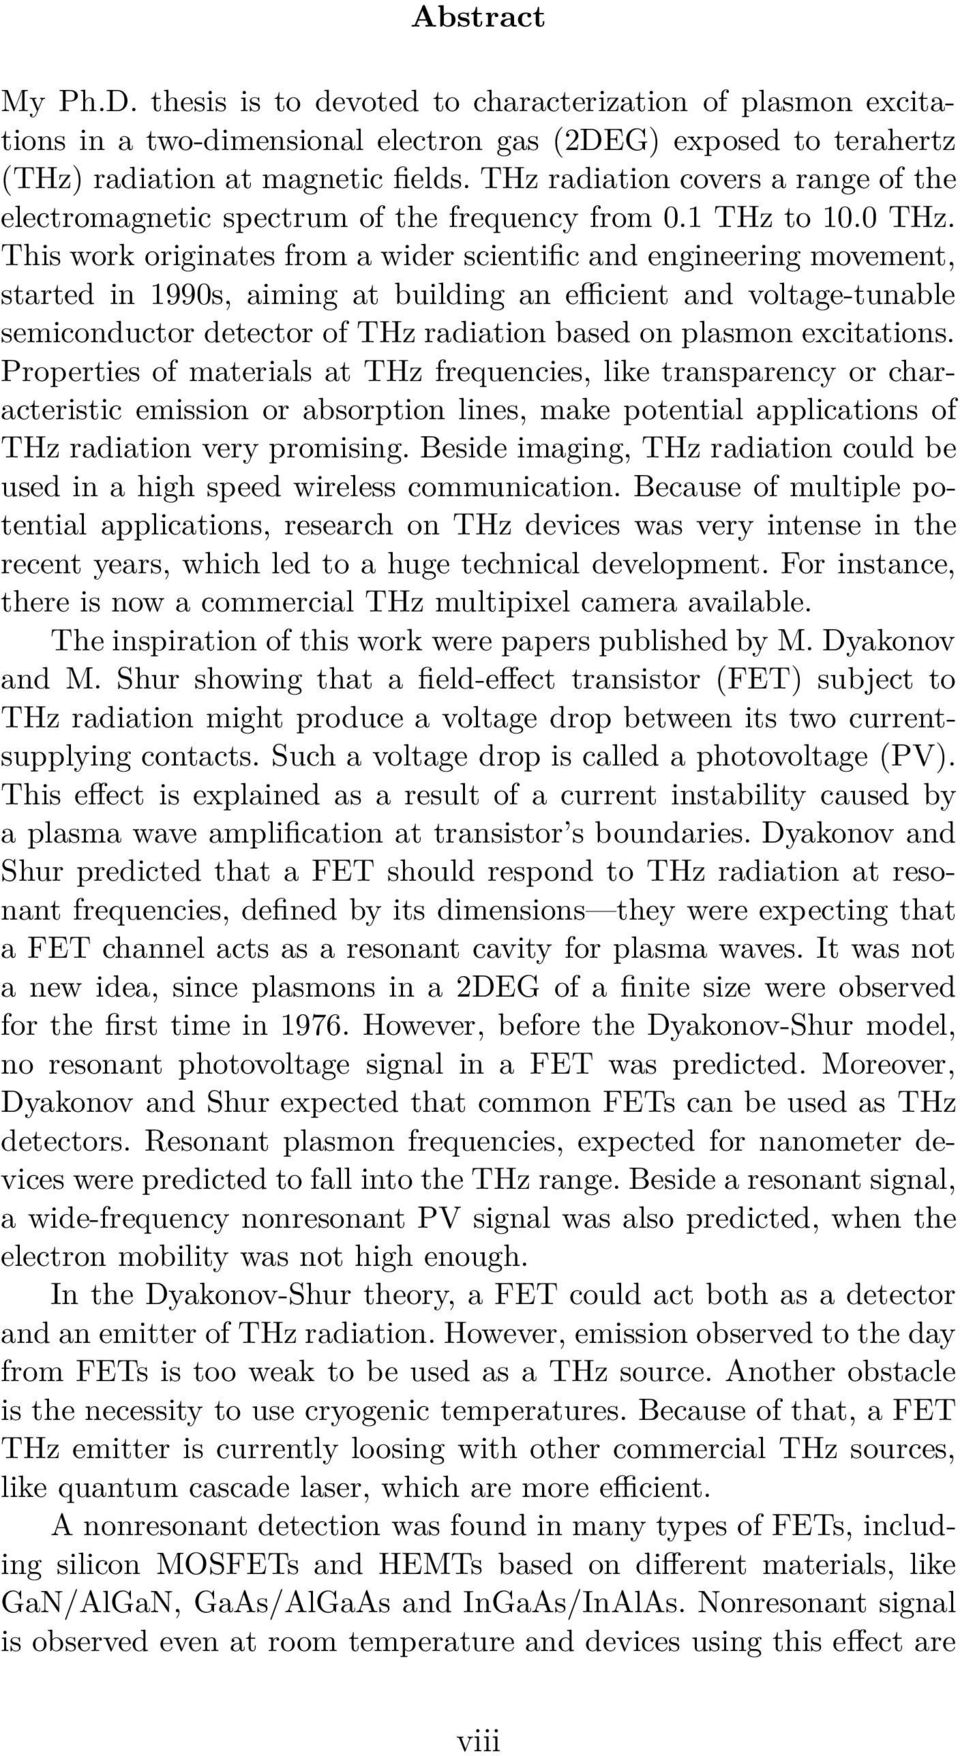 This work originates from a wider scientific and engineering movement, started in 1990s, aiming at building an efficient and voltage-tunable semiconductor detector of THz radiation based on plasmon